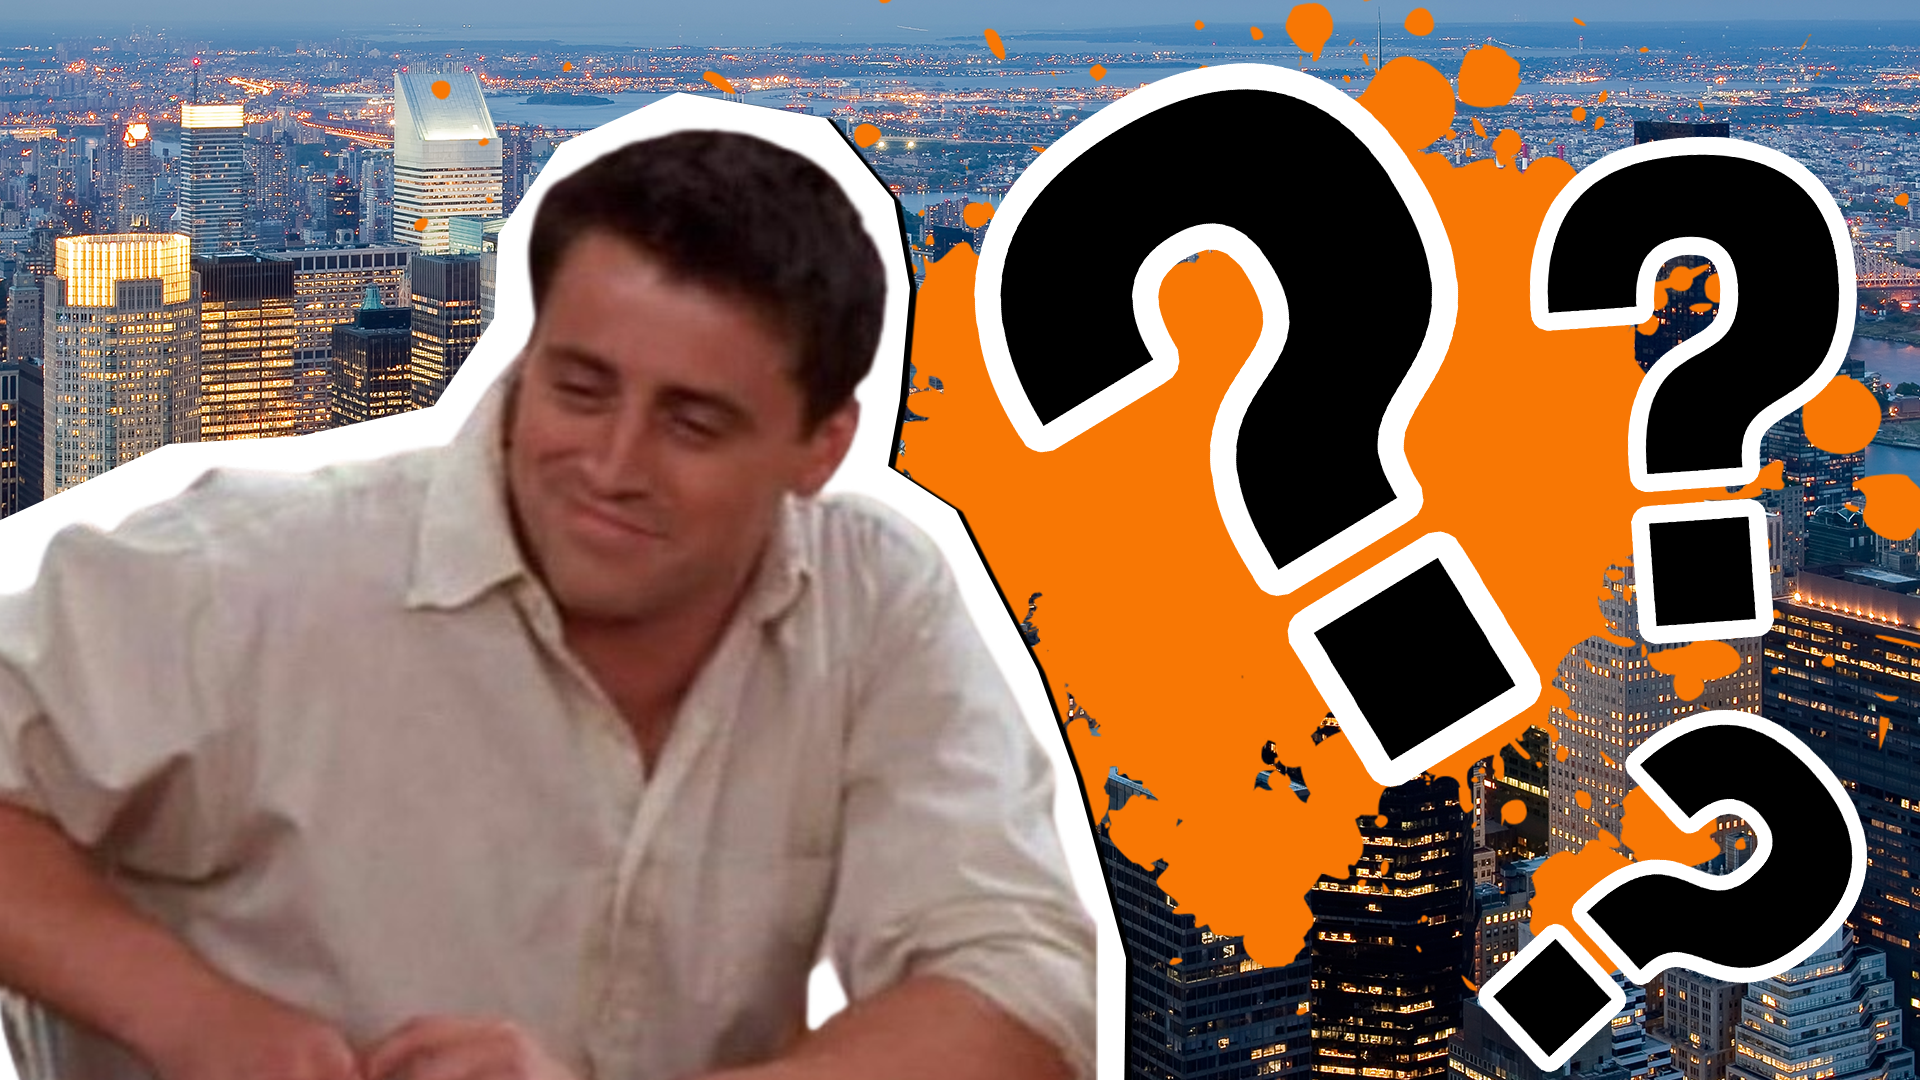 101 'Friends' Trivia Questions That Are Harder Than Getting a Couch Upstairs